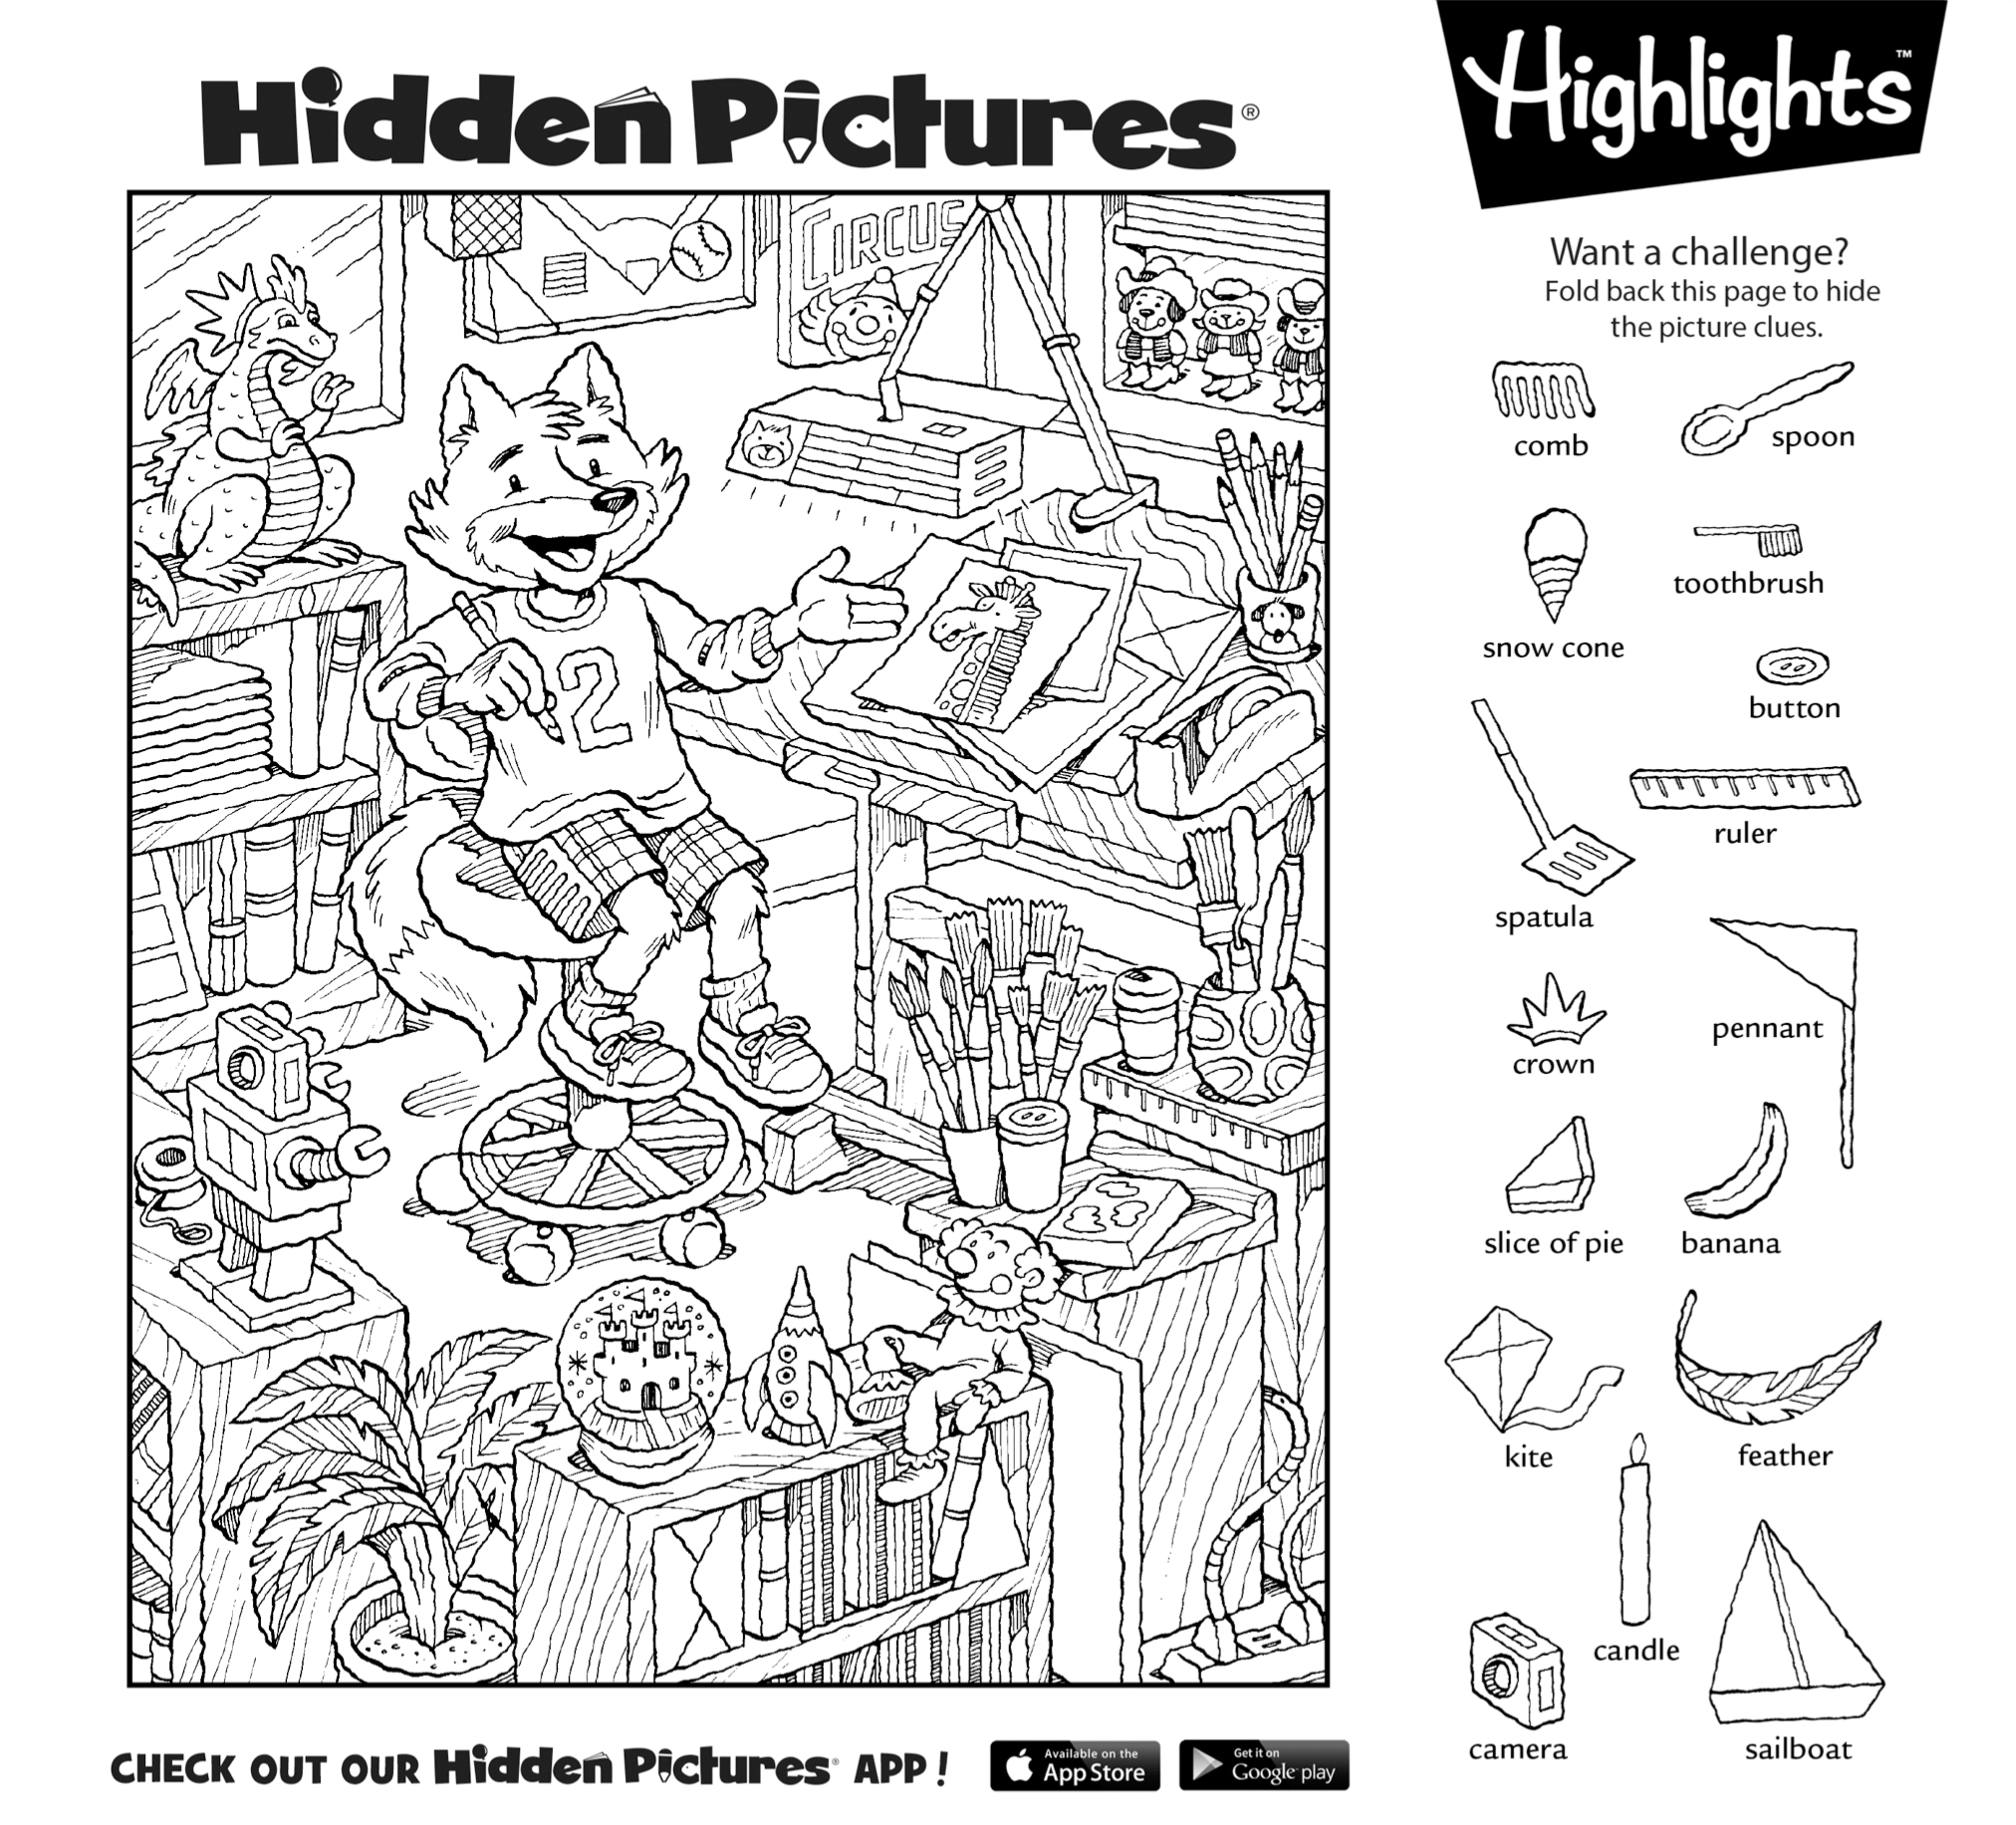 Download This Free Printable Hidden Pictures Puzzle To Share With - Free Printable Puzzles For 3 Year Olds